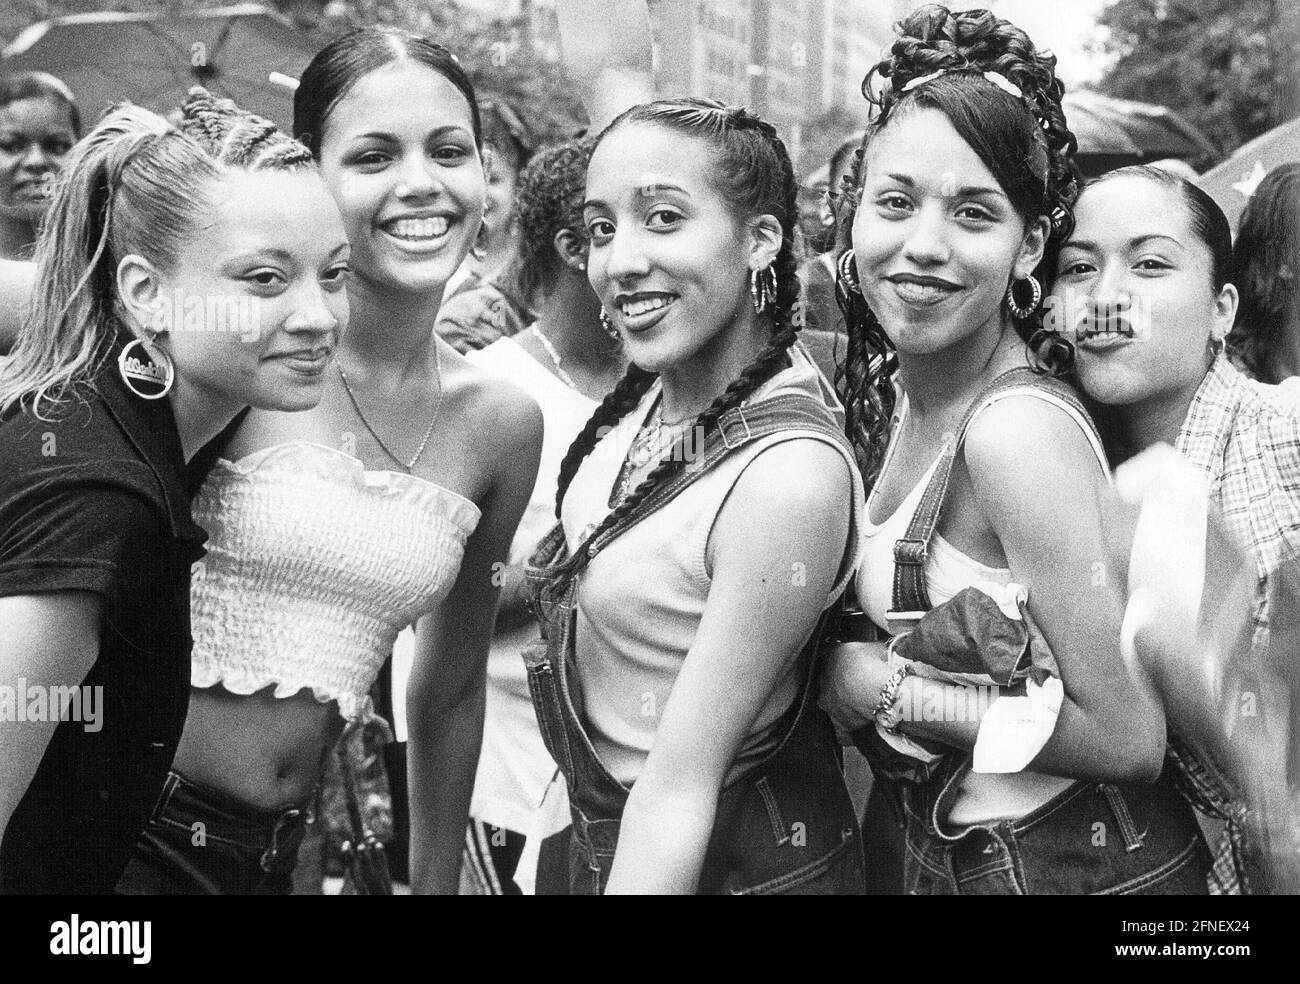 Puerto rican Black and White Stock Photos & Images - Alamy